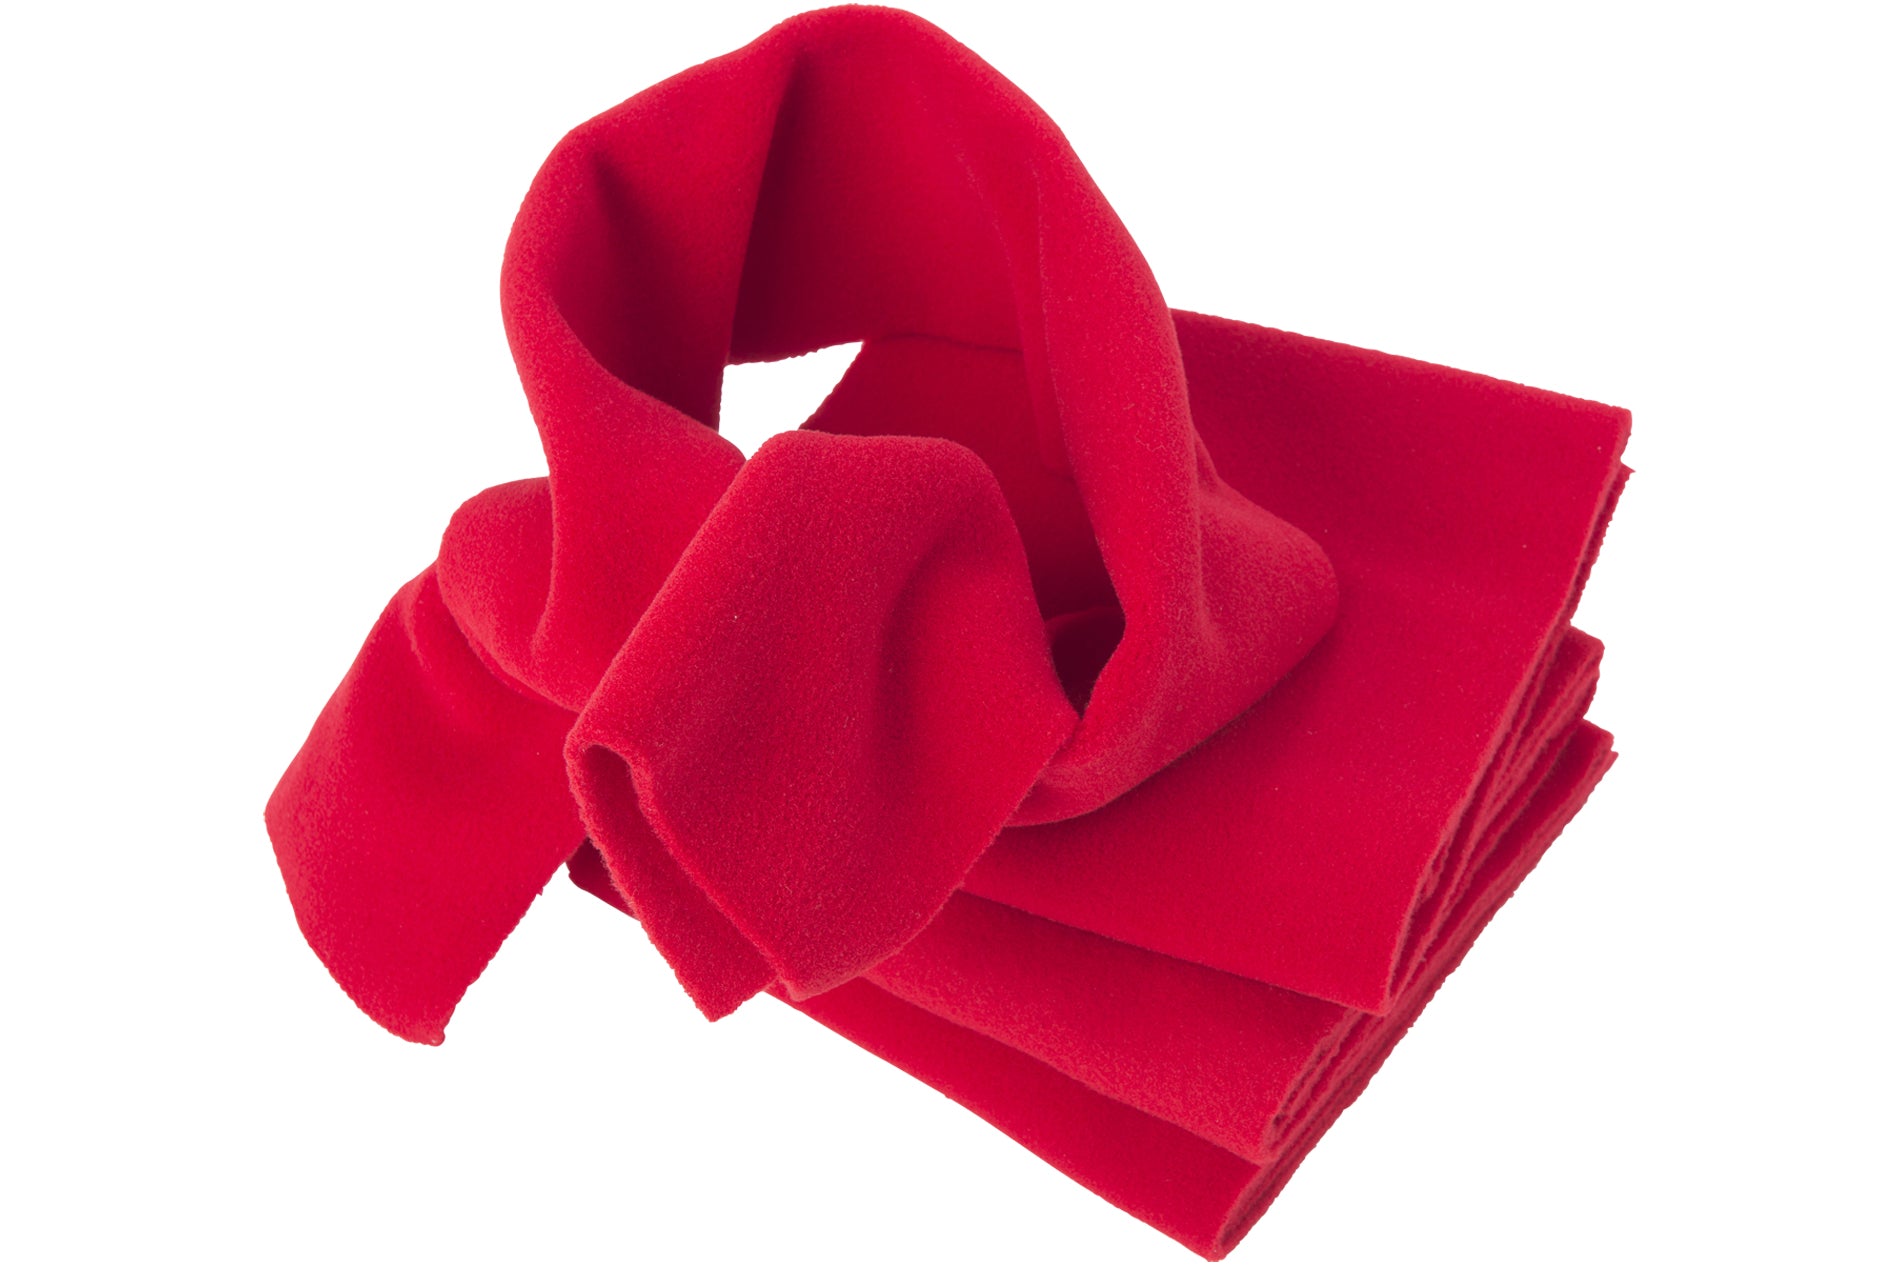 Red fleece blindfold for use with team building activities from Metalog Training Tools